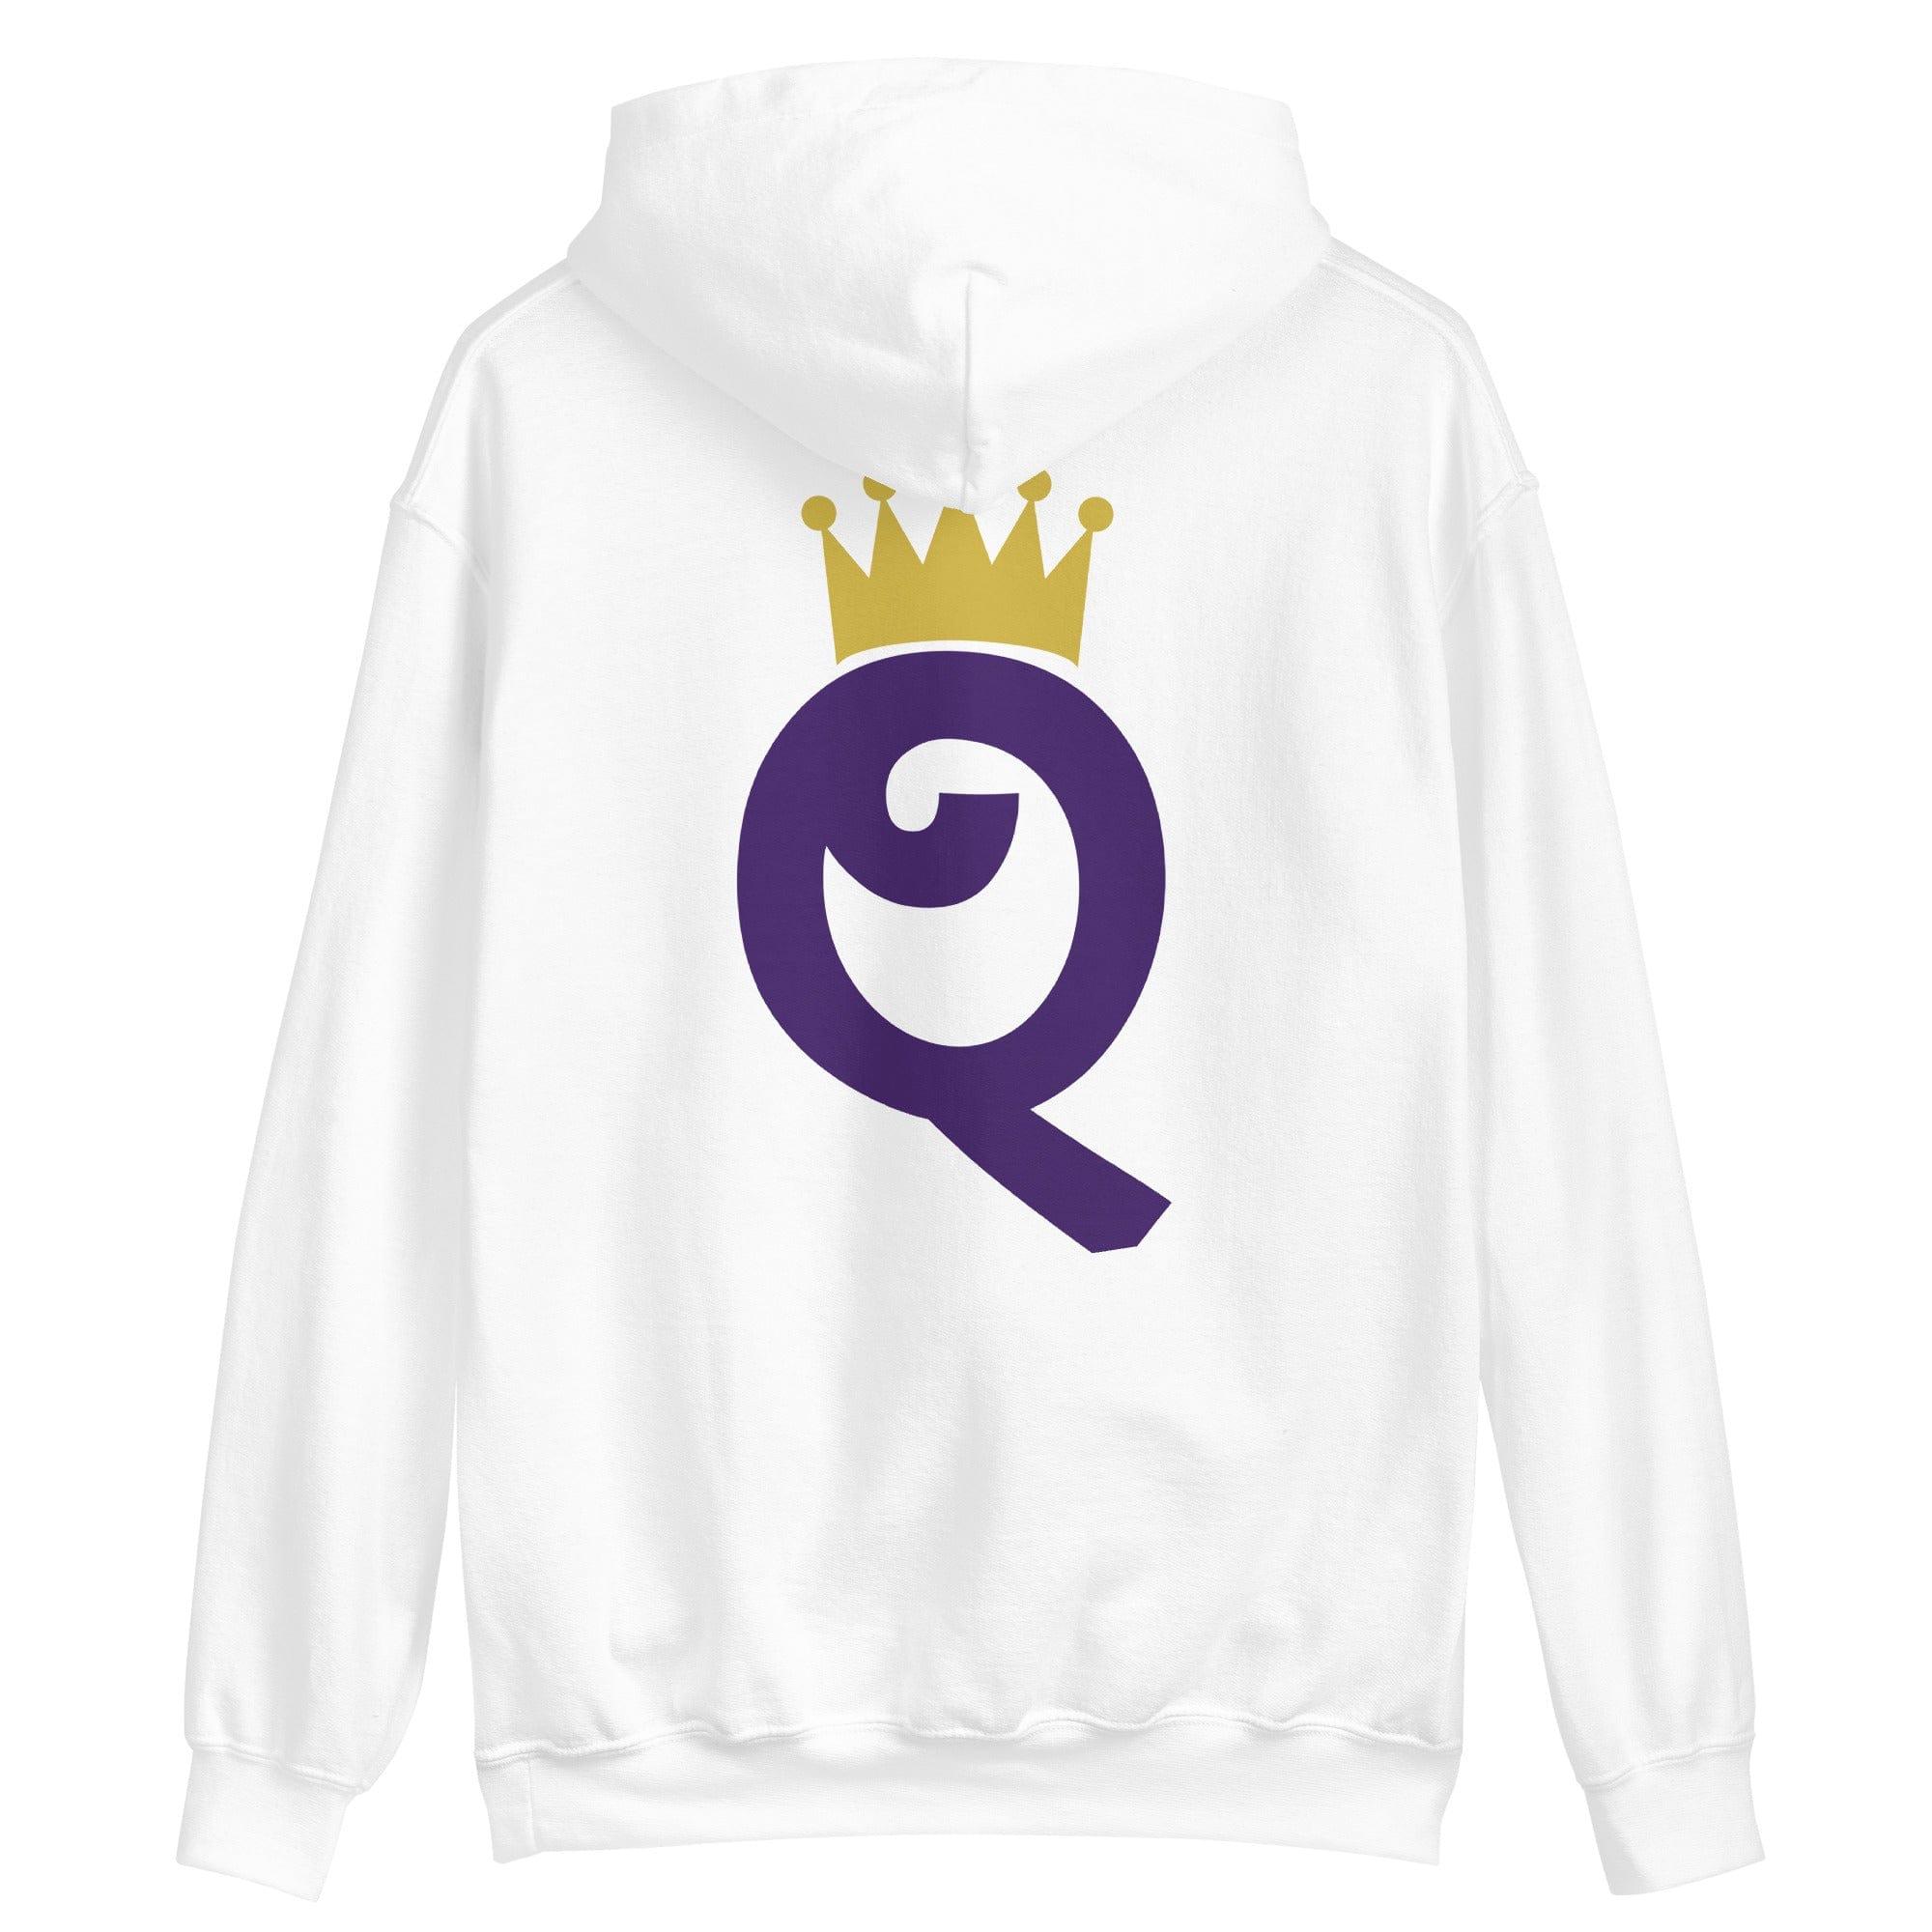 Mother's Day Hoodie Queen with Gold Crown Rear Design Unisex Pullover - TopKoalaTee